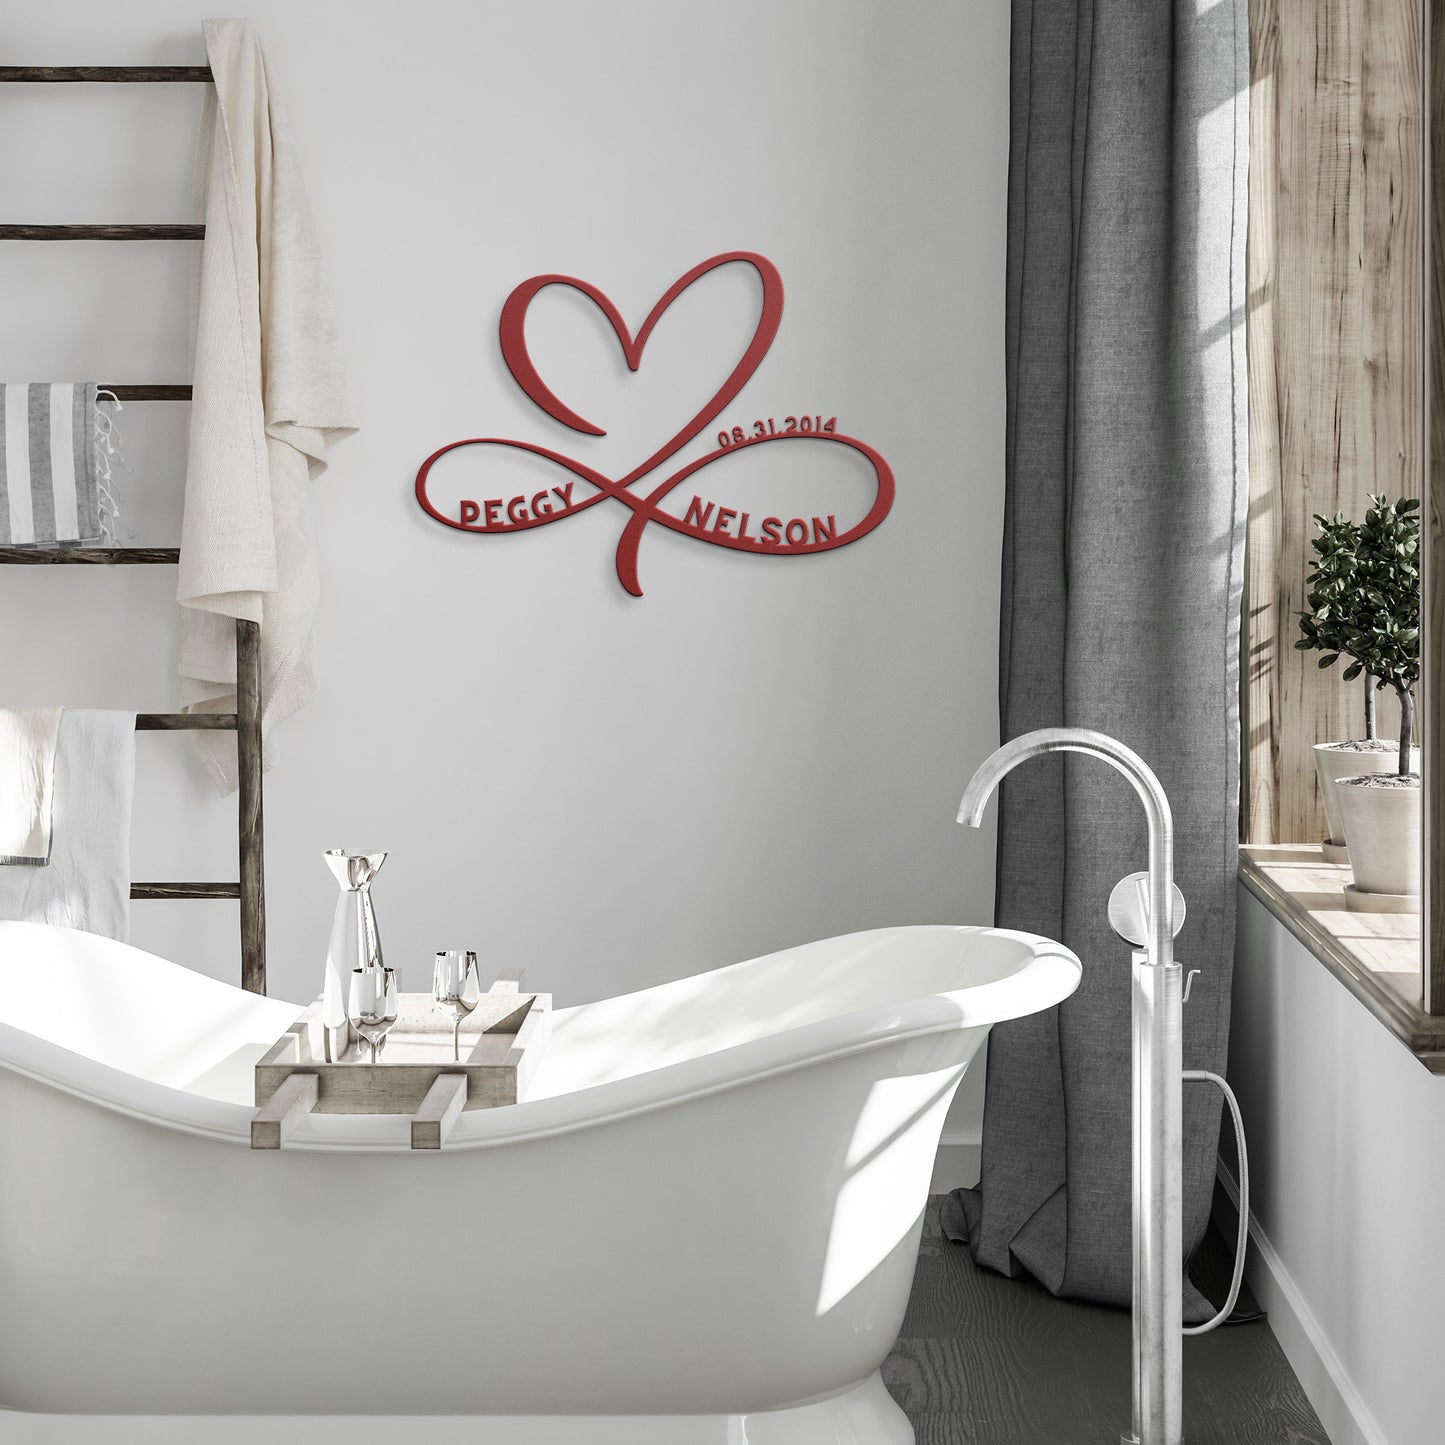 A teelaunch Personalized Infinity Love Heart Metal Art Sign that serves as home decor in a bathroom, featuring a bathtub and a red heart wall art.